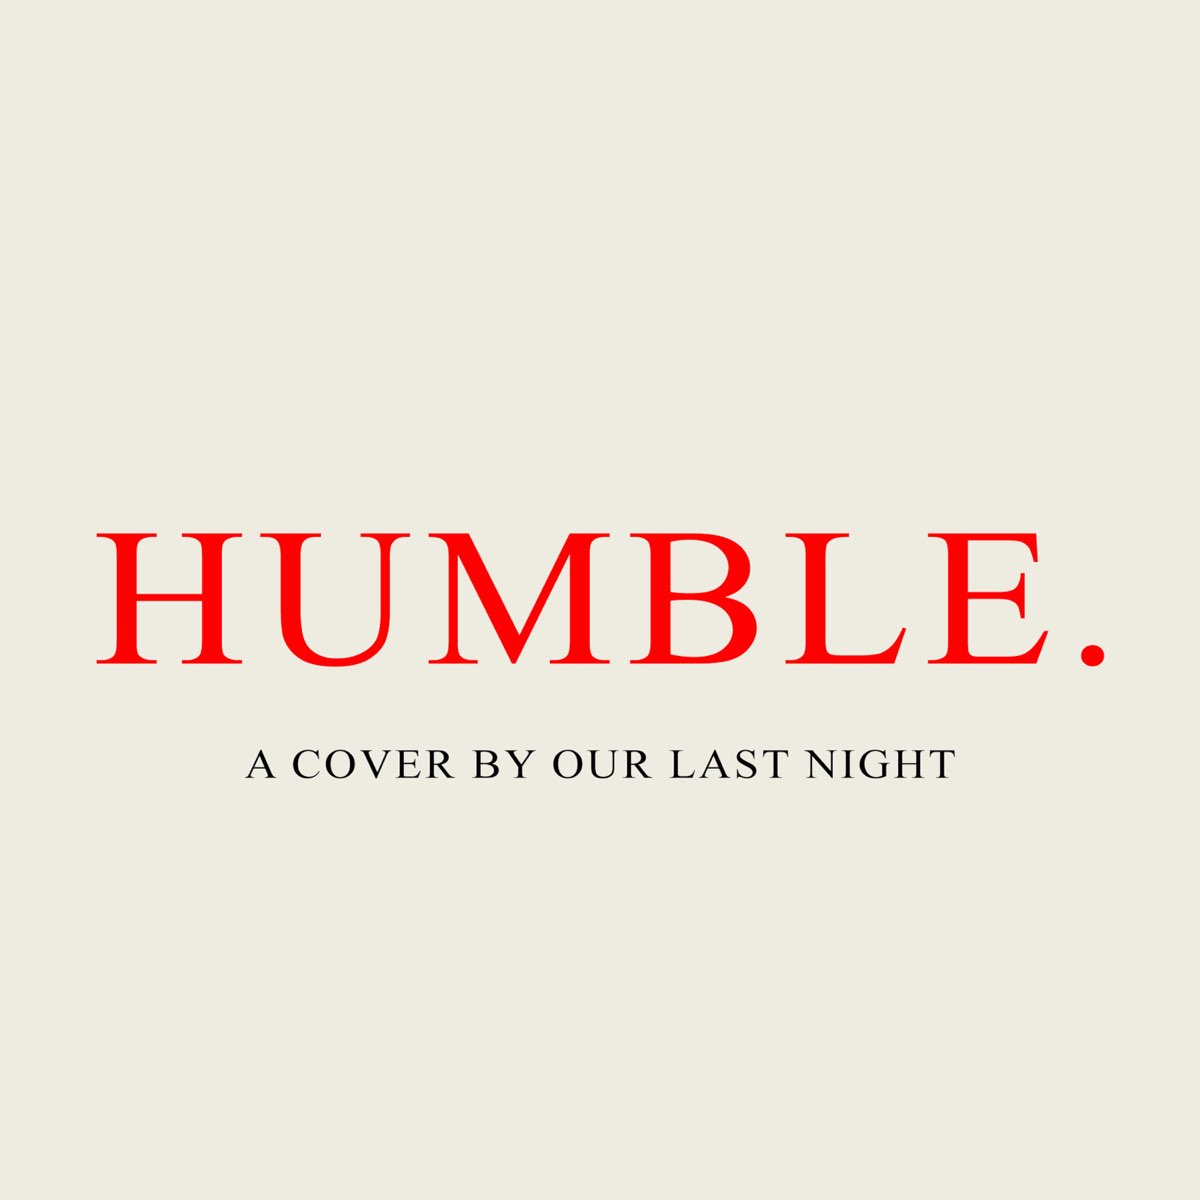 When you home last night. Our last Night обложка. Humble обложка. Обложка песни Humble. Kendrick Lamar Humble Cover.